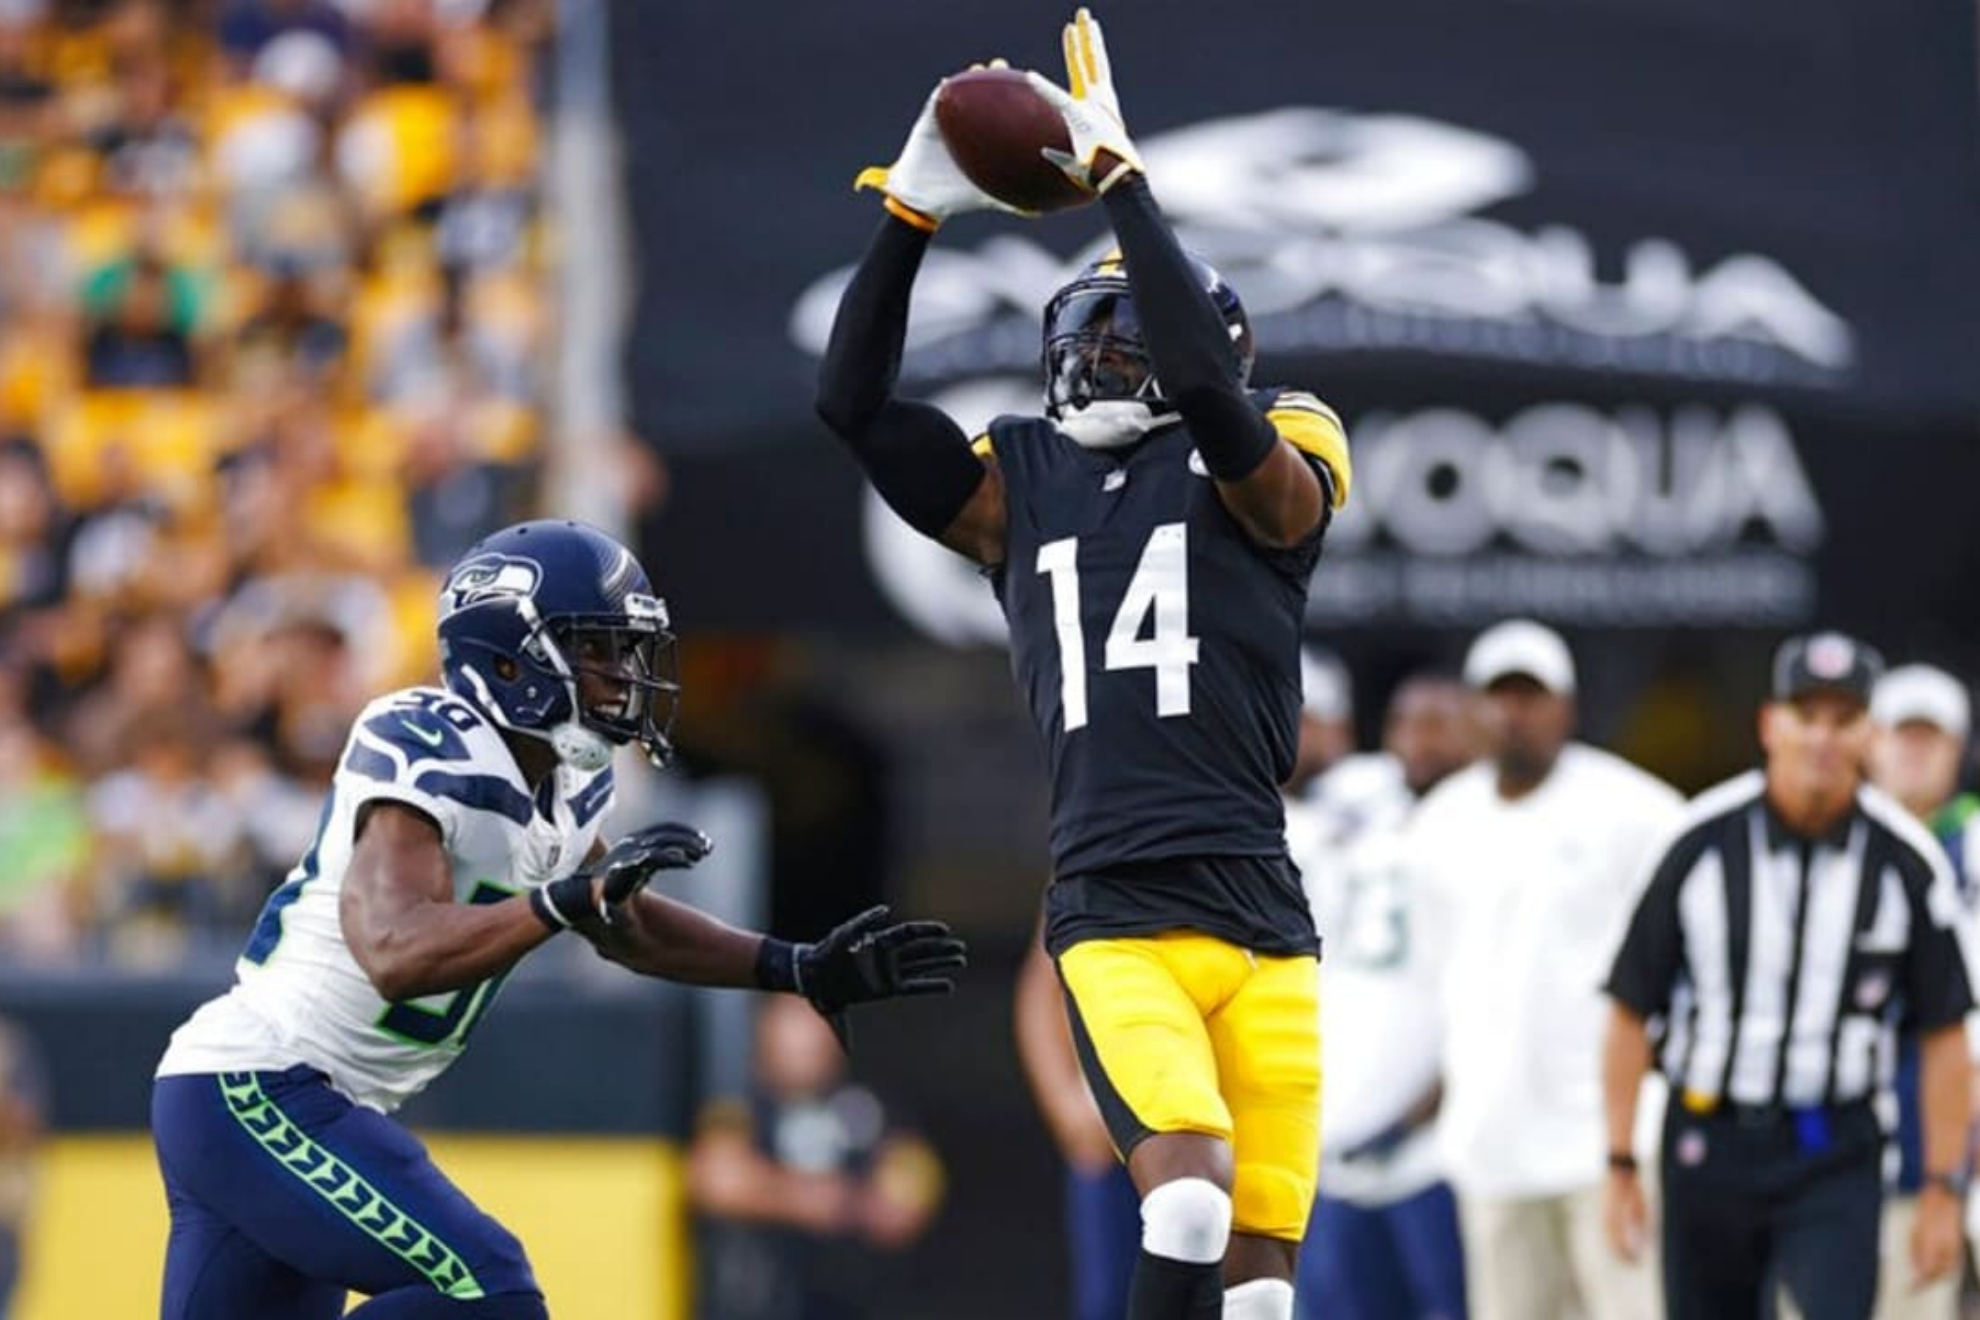 George Pickens makes a catch during the Steelers preseason game against the Seahawks. - nfl.com